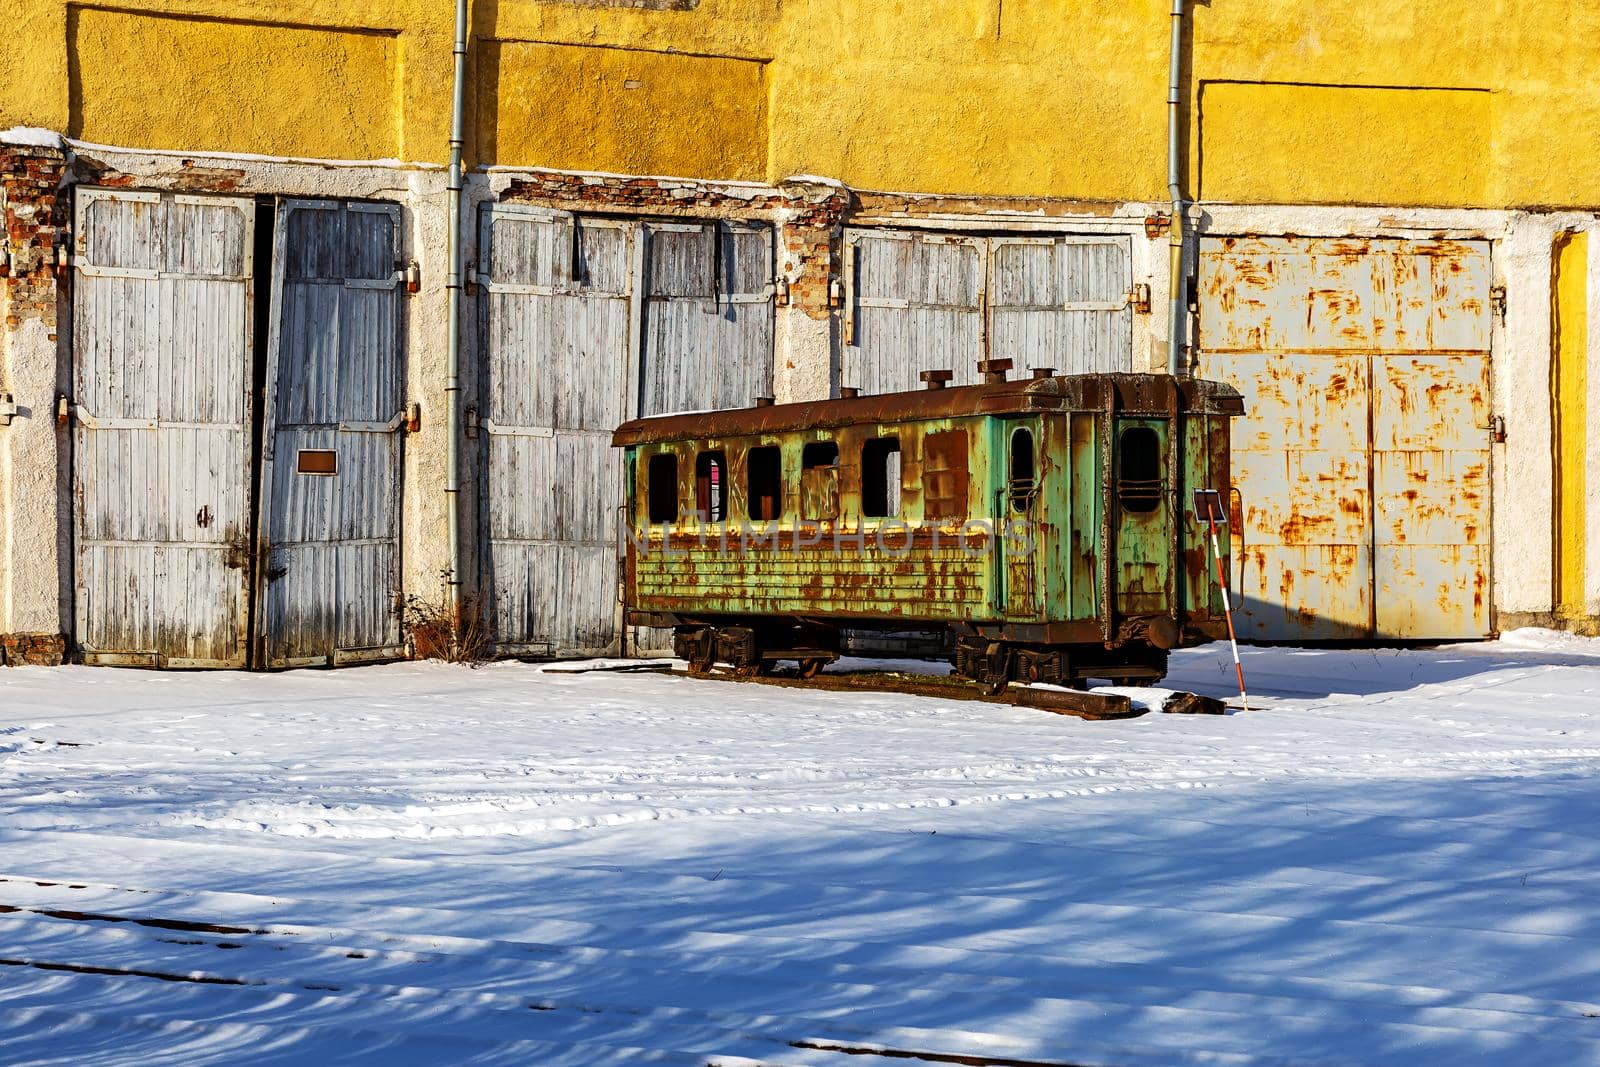 Old railway carriage in a depot on the background of a building with a gate by seka33